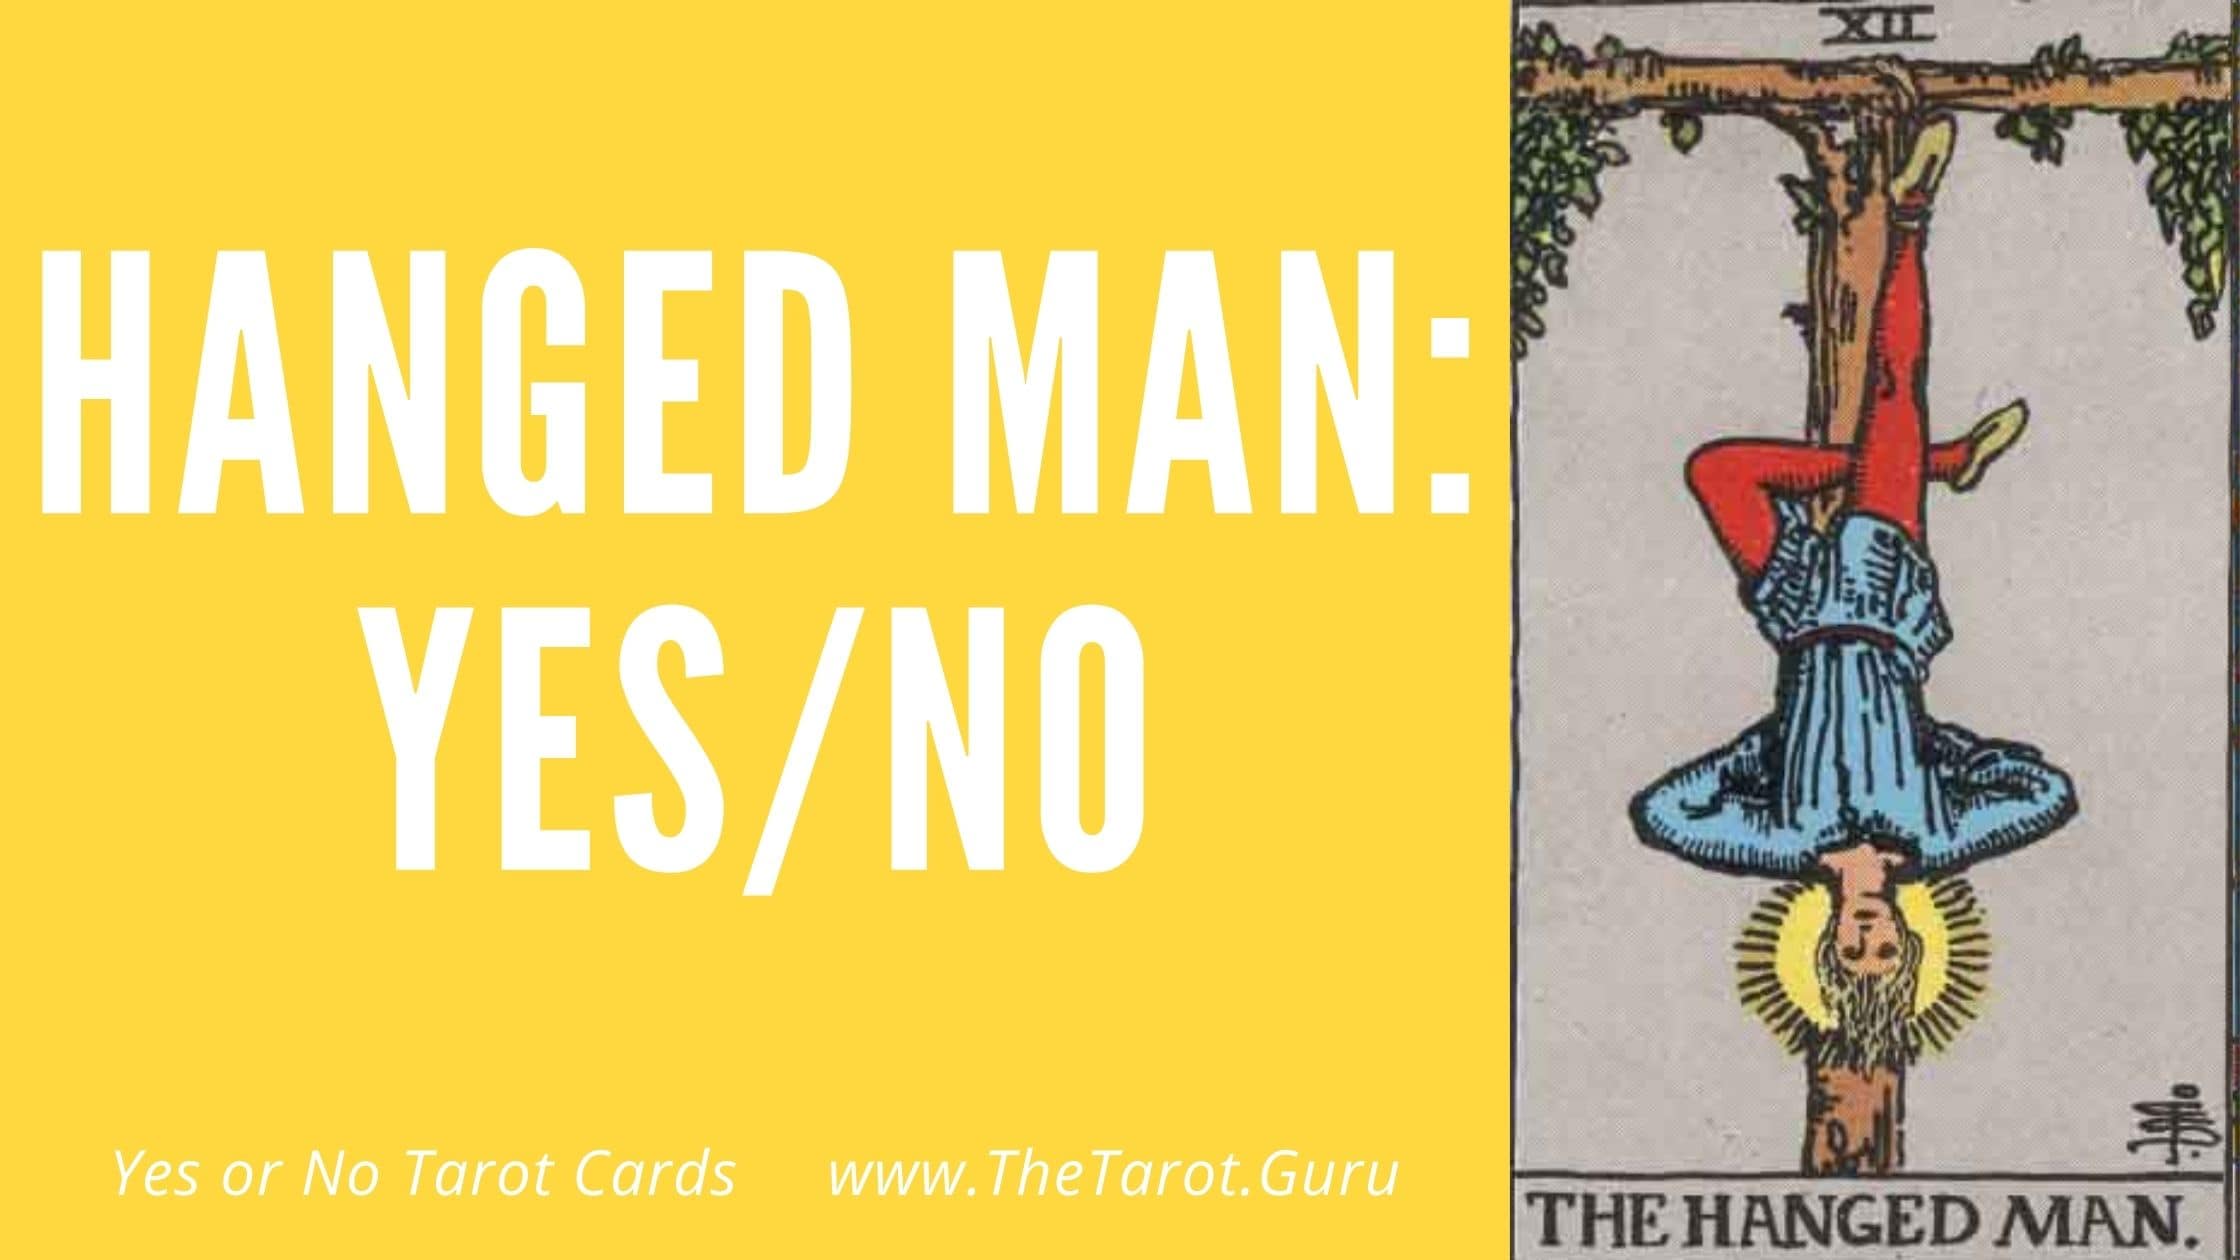 The Hanged Man Yes or No Tarot